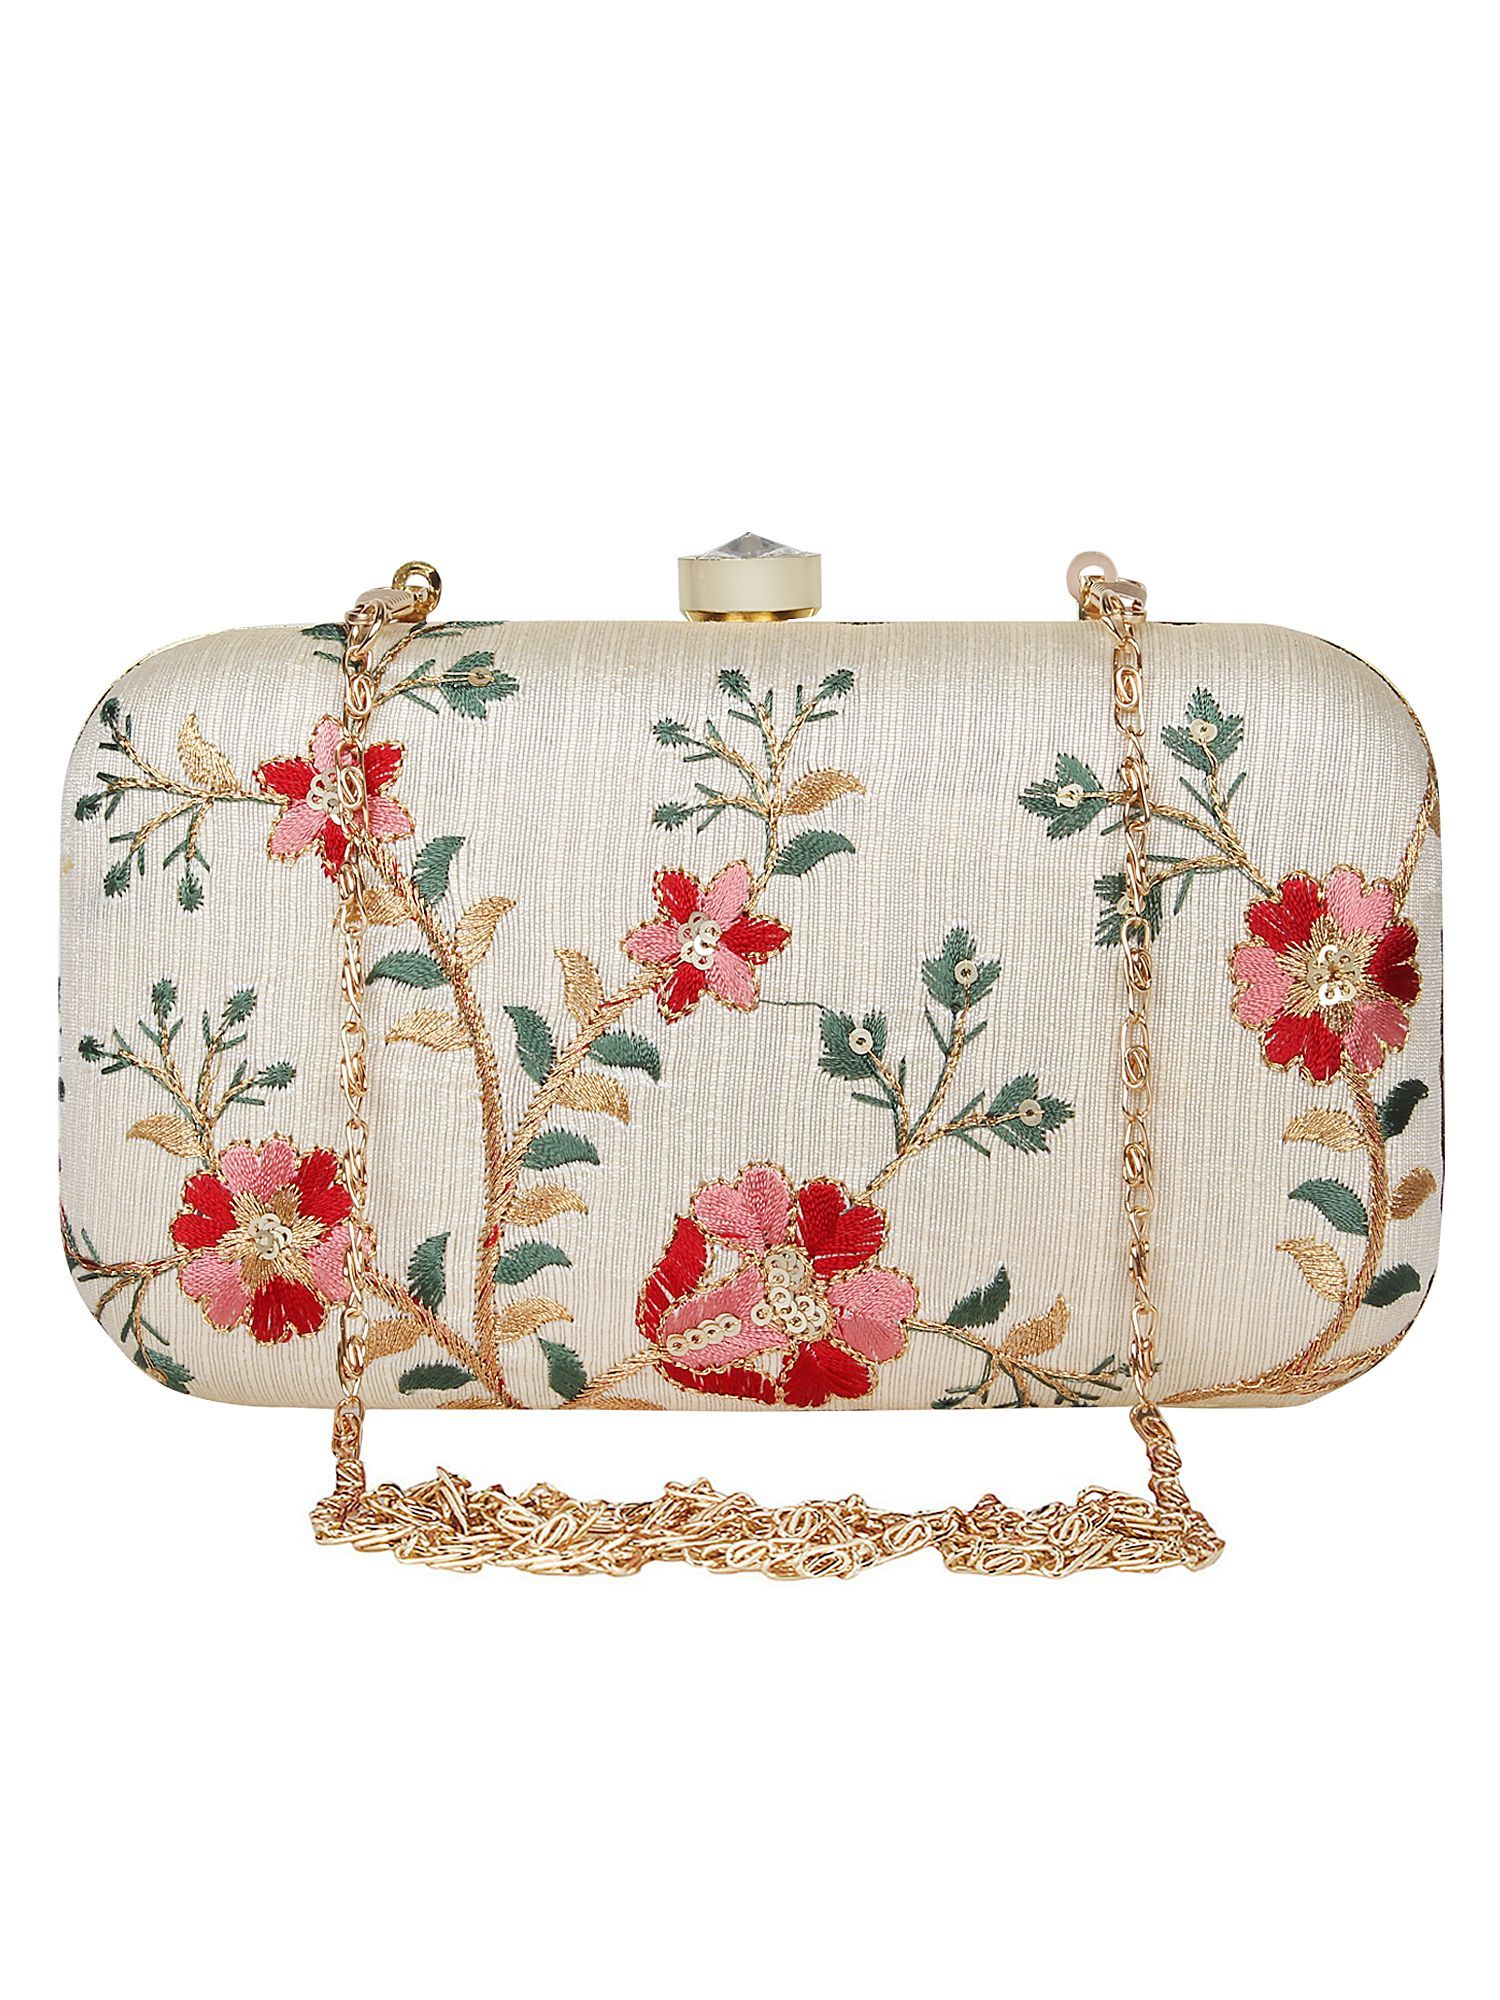 1980s Sophisticated Cream Clutch by La Regale. Perfect Neutral Evening